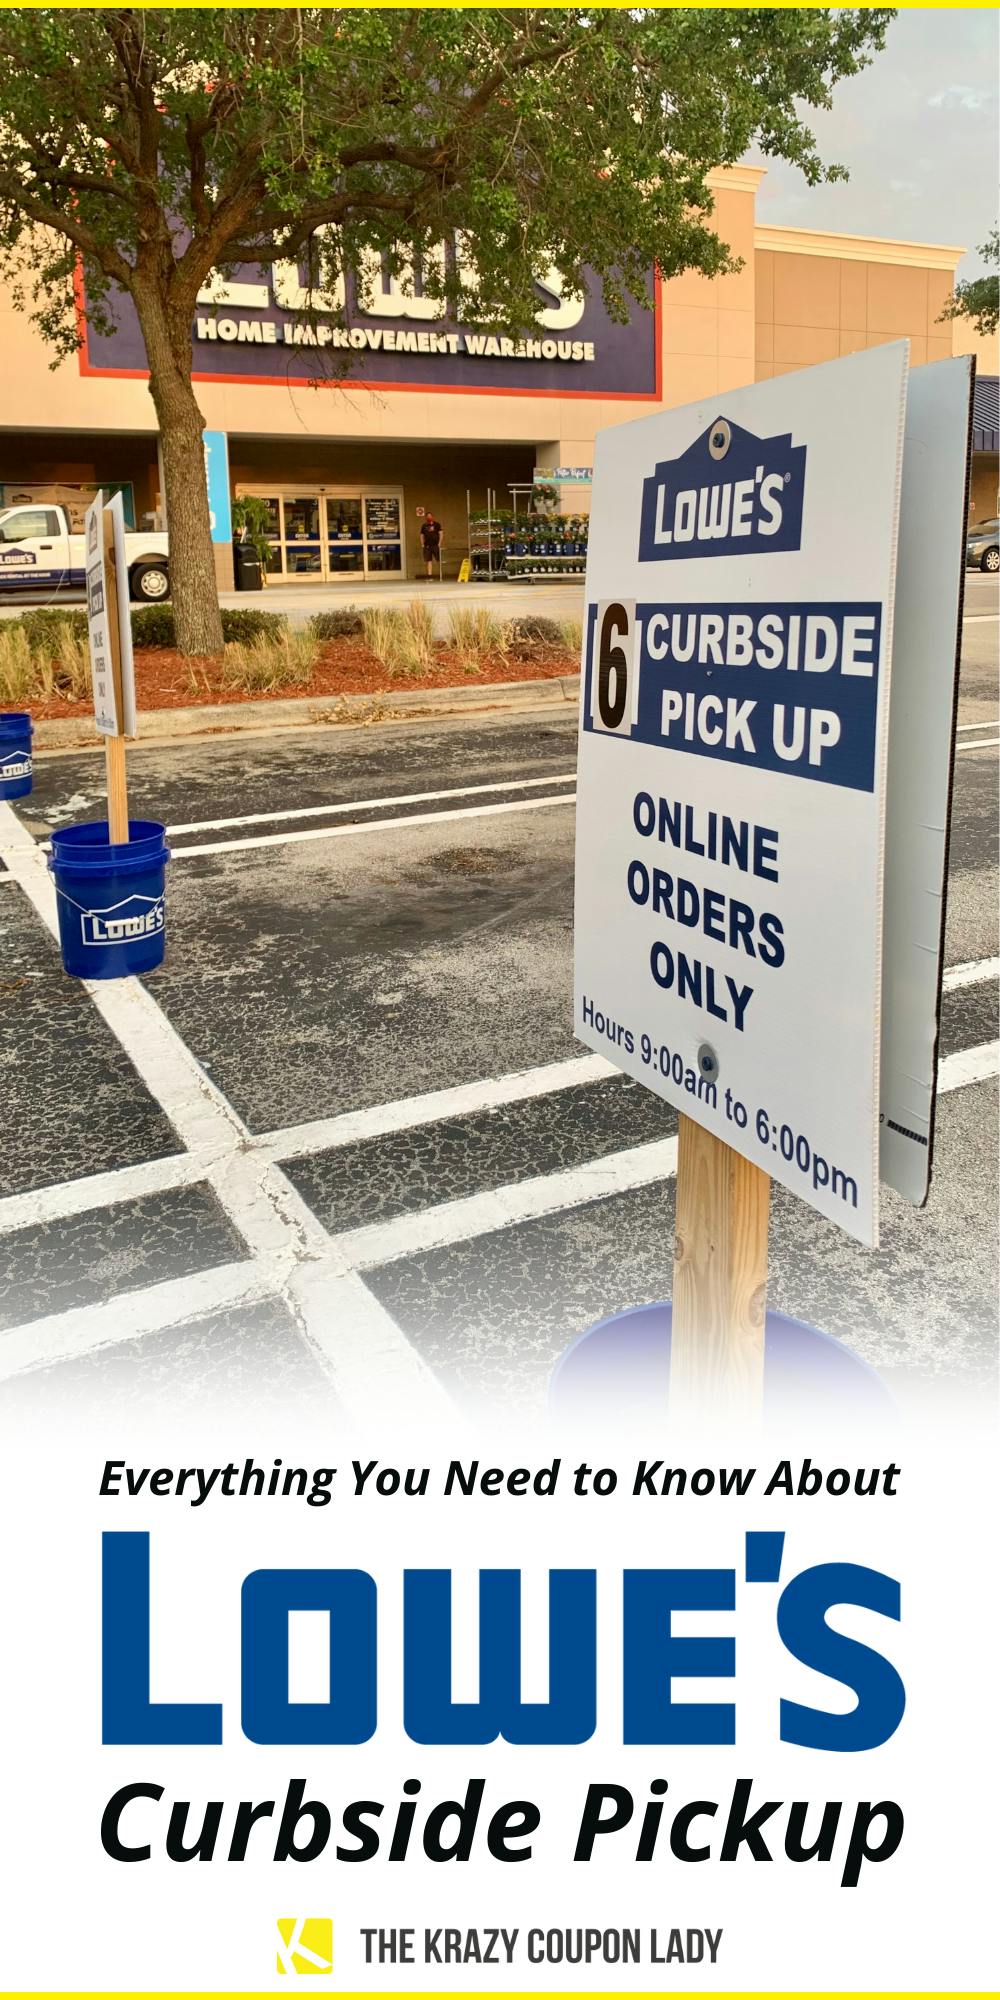 Lowe's Curbside Pickup: All You Need in 4 Easy Steps